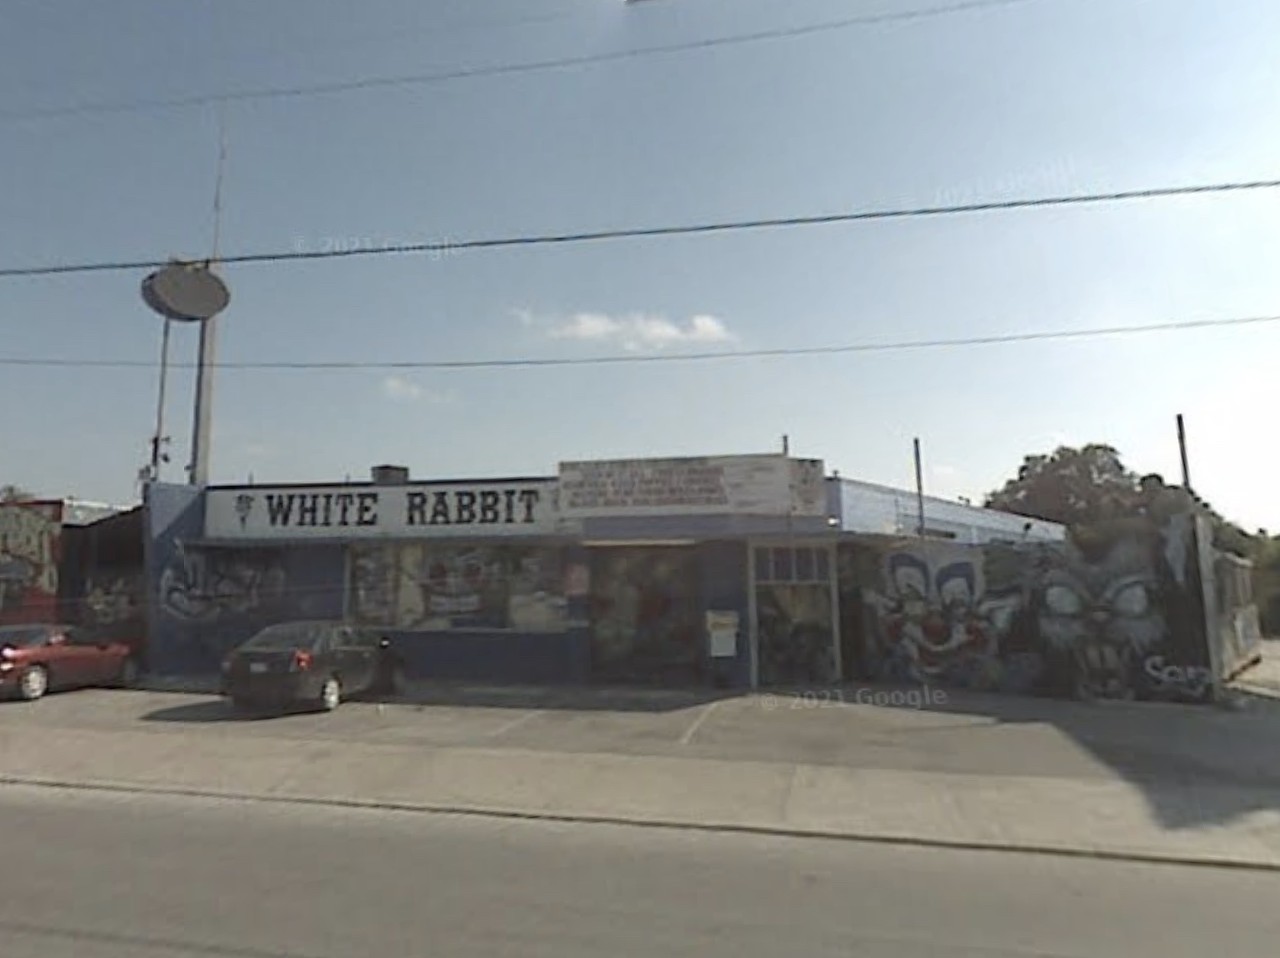 White Rabbit
Much like Paper Tiger, its successor on the St. Mary's Strip, the White Rabbit was a club where local bands could open for nationally touring acts that had outgrown small clubs but weren’t yet playing concert halls. Bands that played there included Primus, They Might Be Giants, The Melvins, Henry Rollins, Wayne Kramer and more.